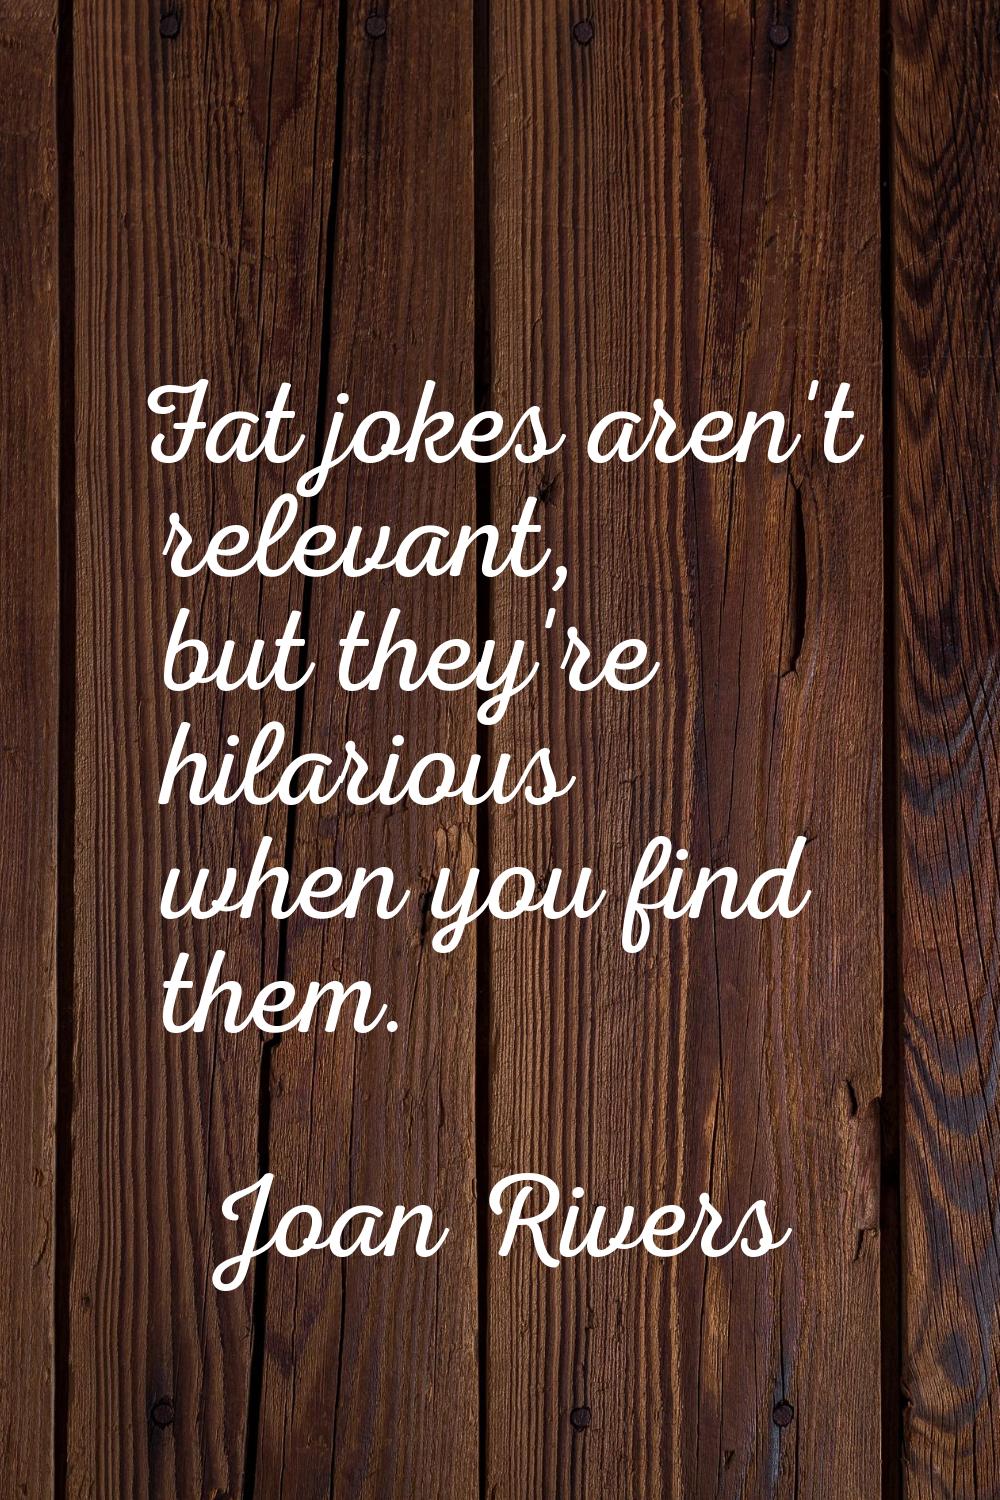 Fat jokes aren't relevant, but they're hilarious when you find them.